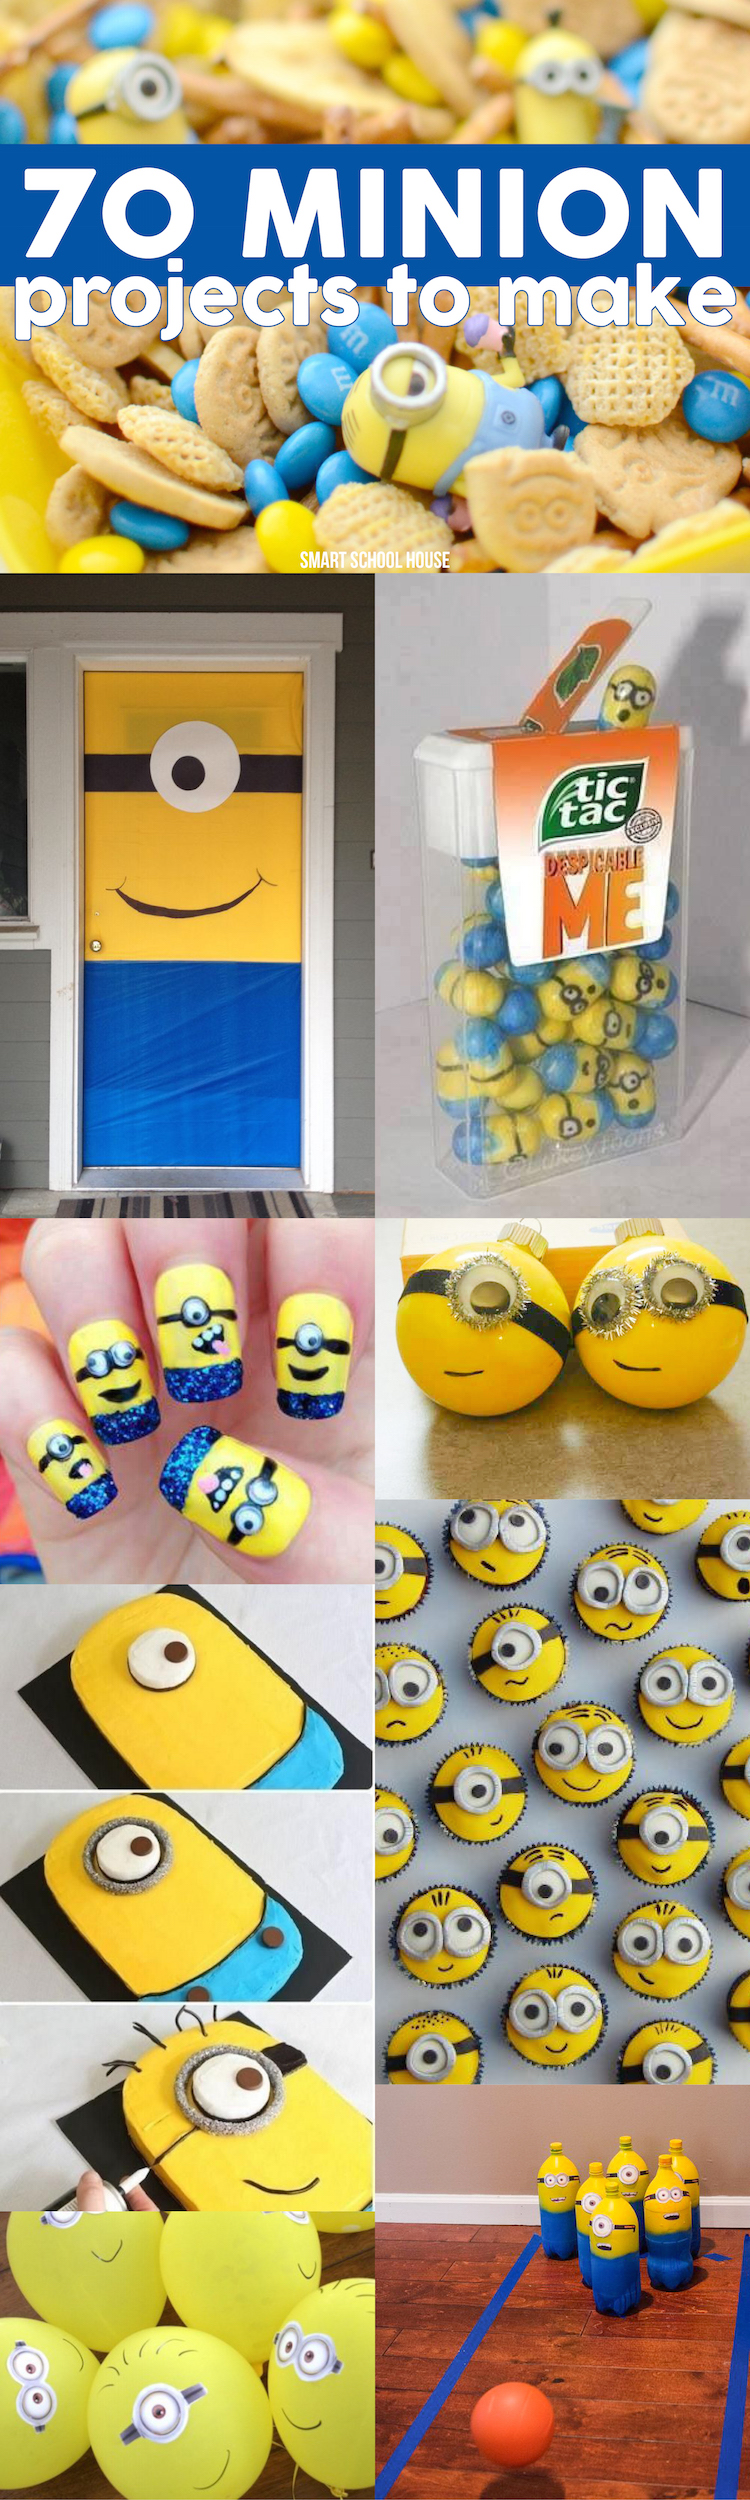 70 Minion Projects to Make 